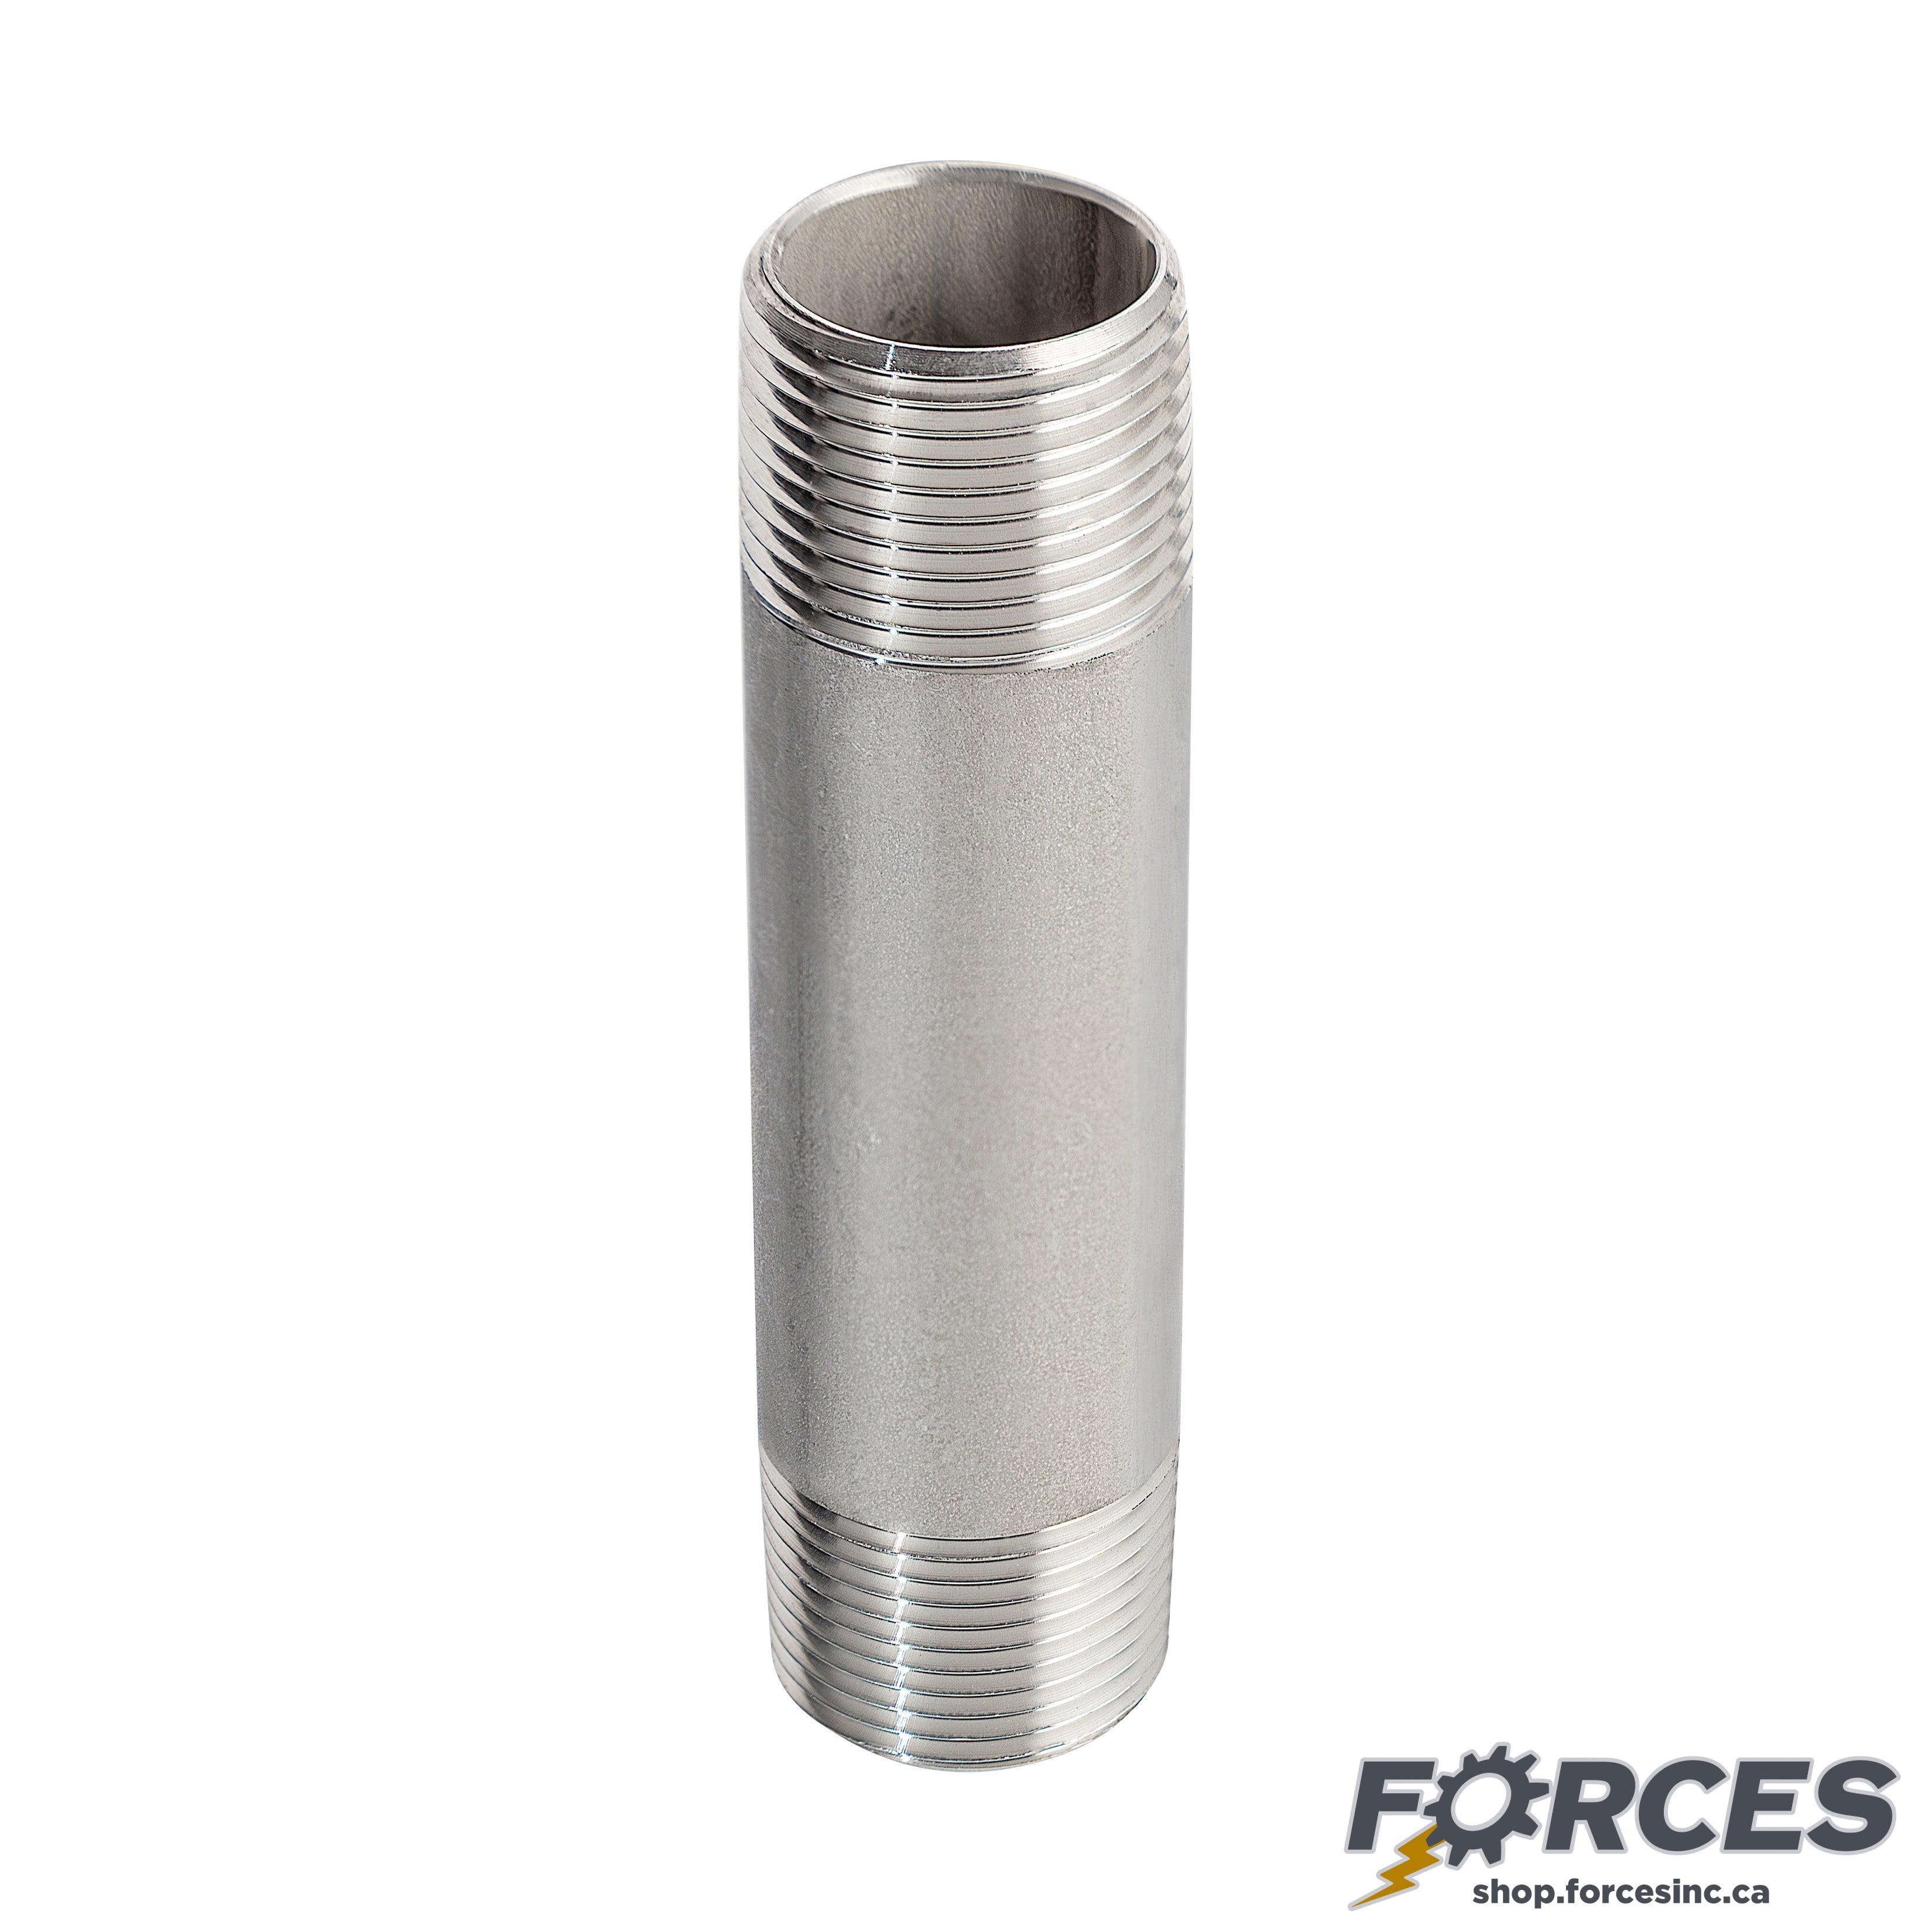 3/4" X 4" Long Nipple - Stainless Steel 316 - Forces Inc